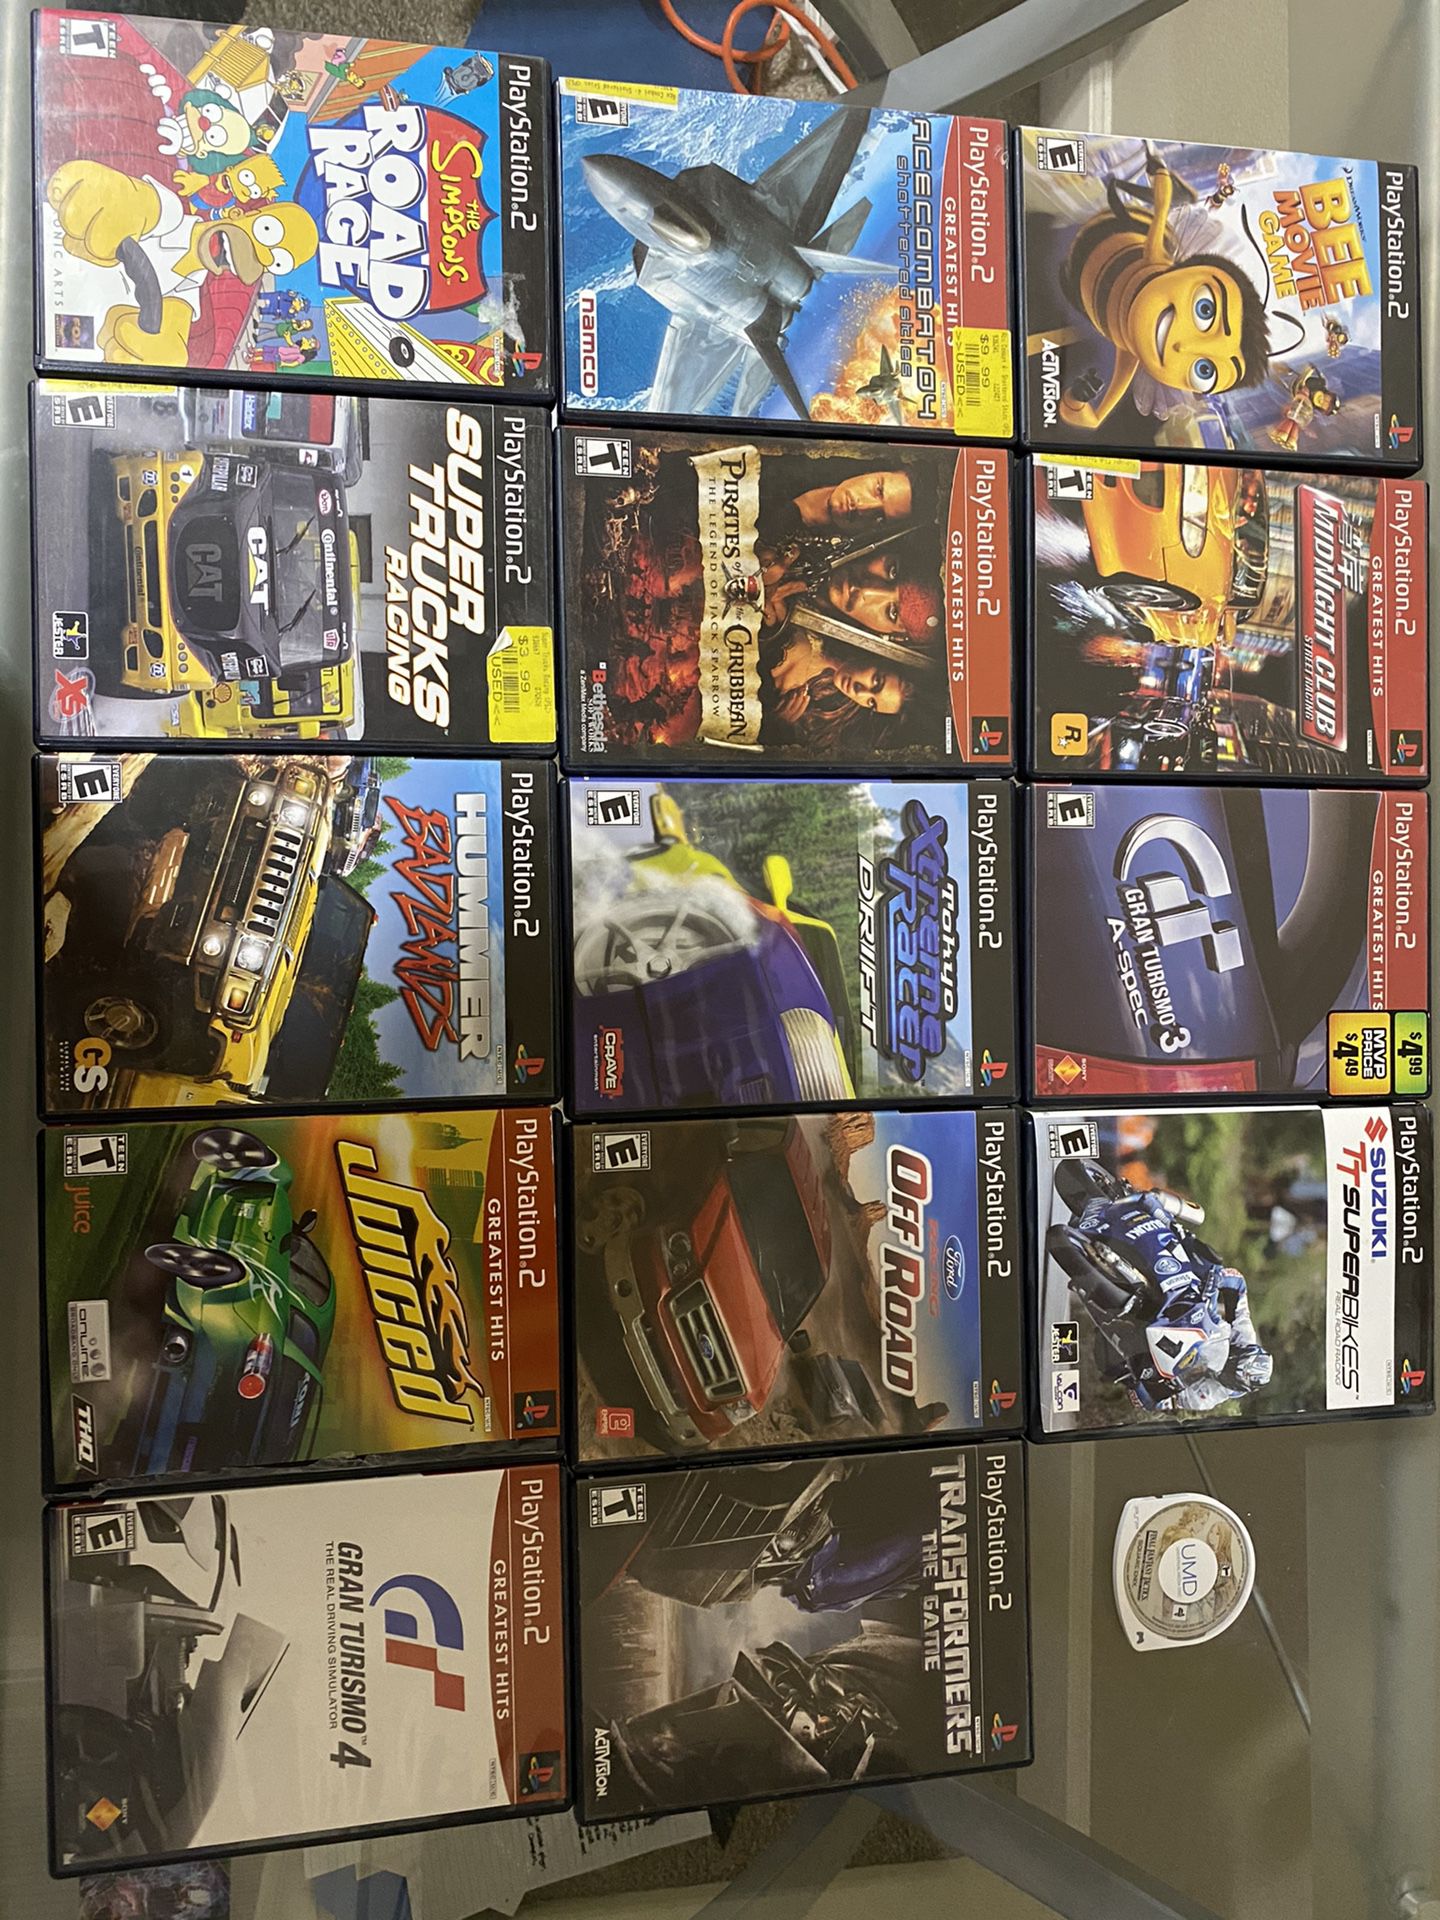 15 Older Games (PS2 and PSP)